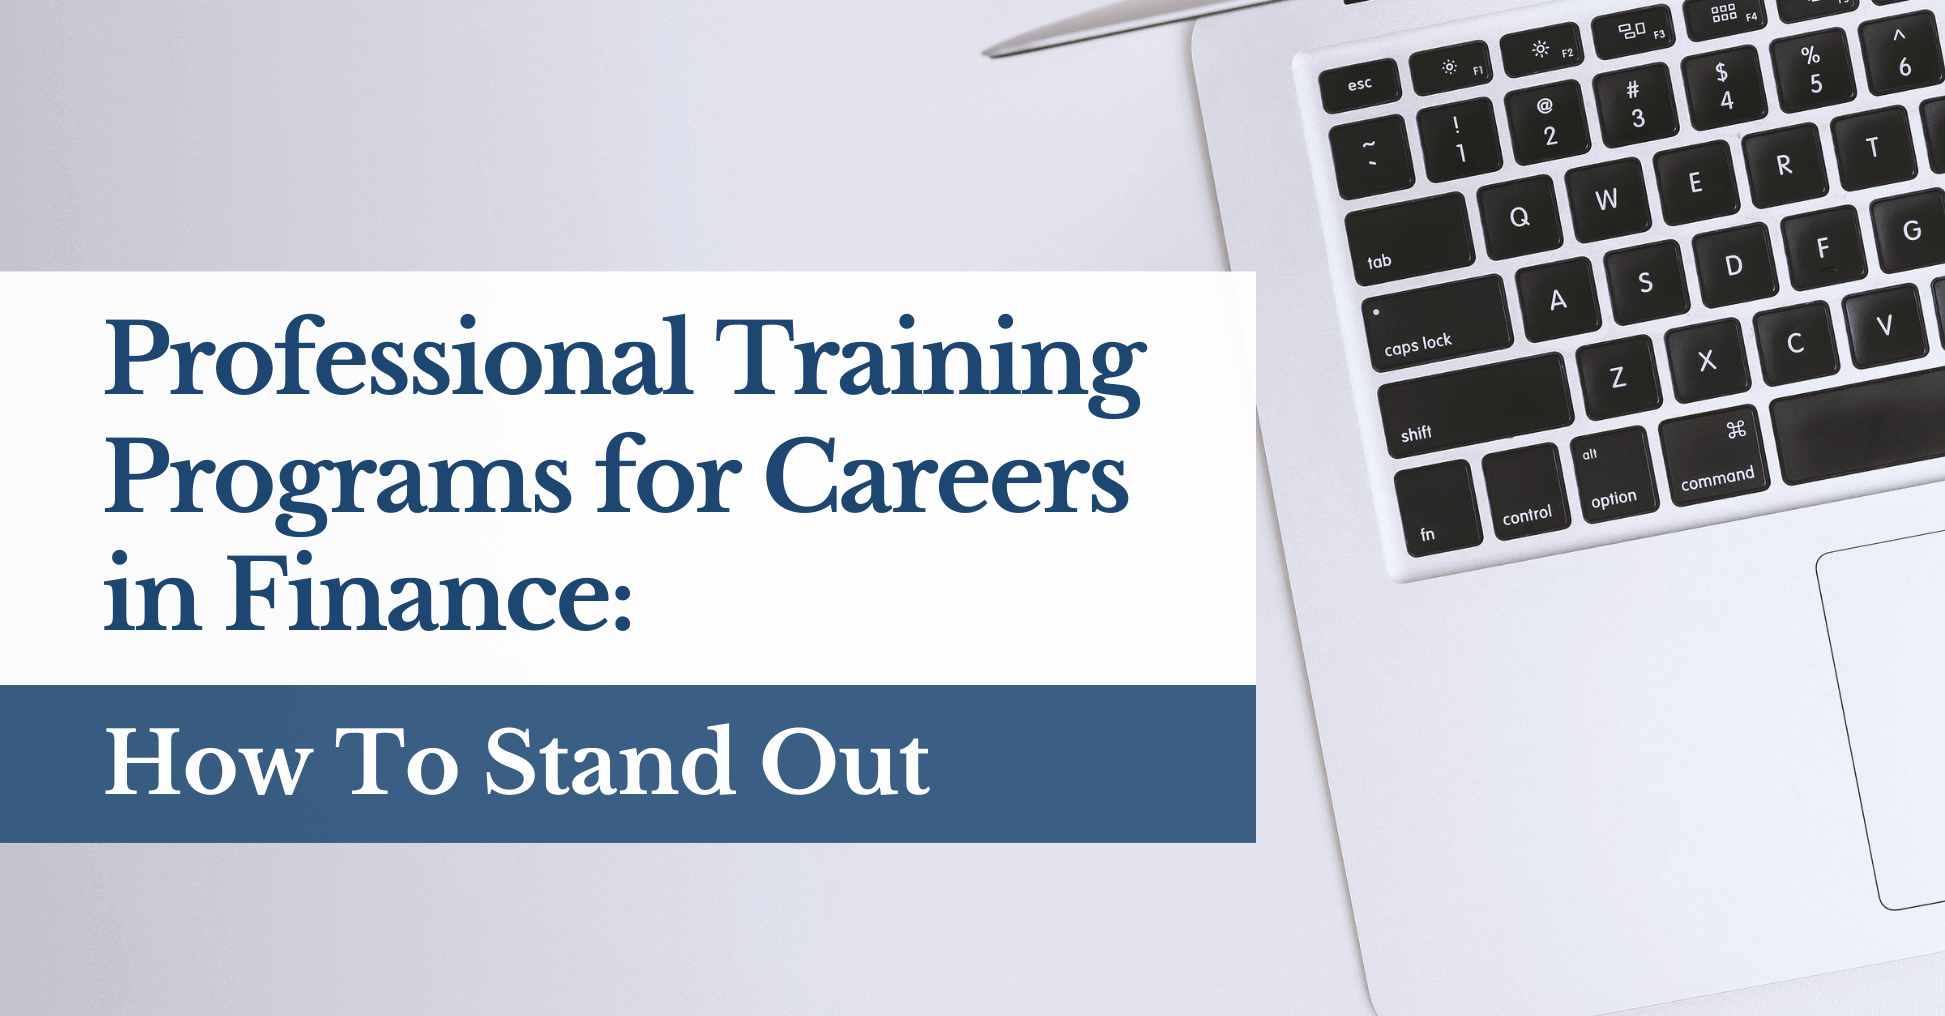 Professional Training Programs for Careers in Finance: How to Stand Out